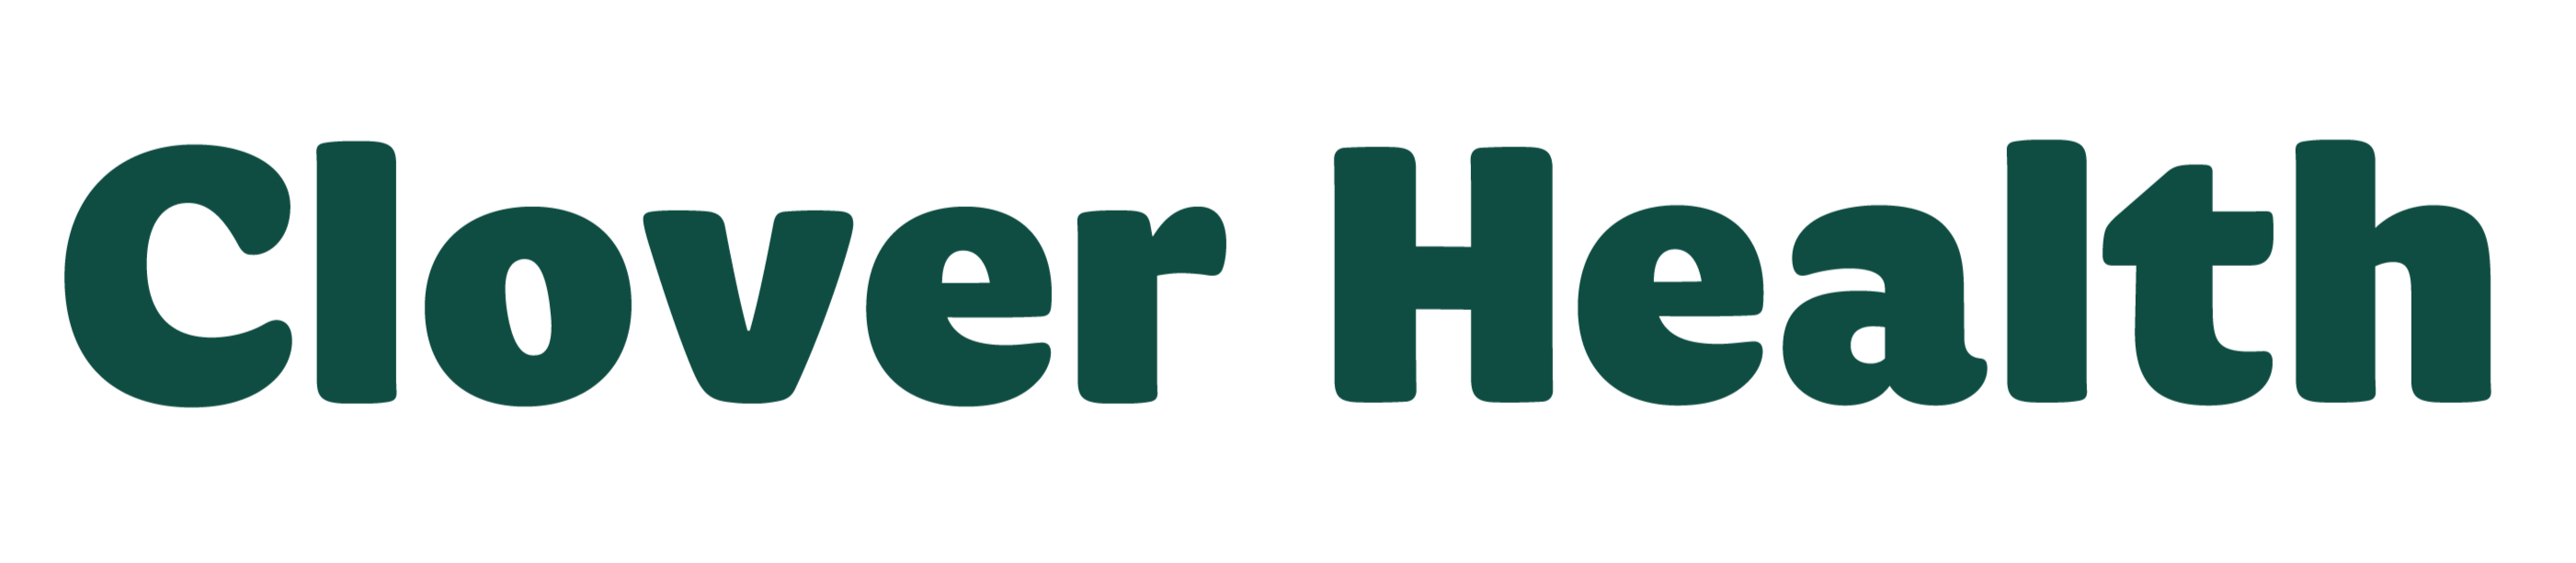 Clover Health Investments Corp logo